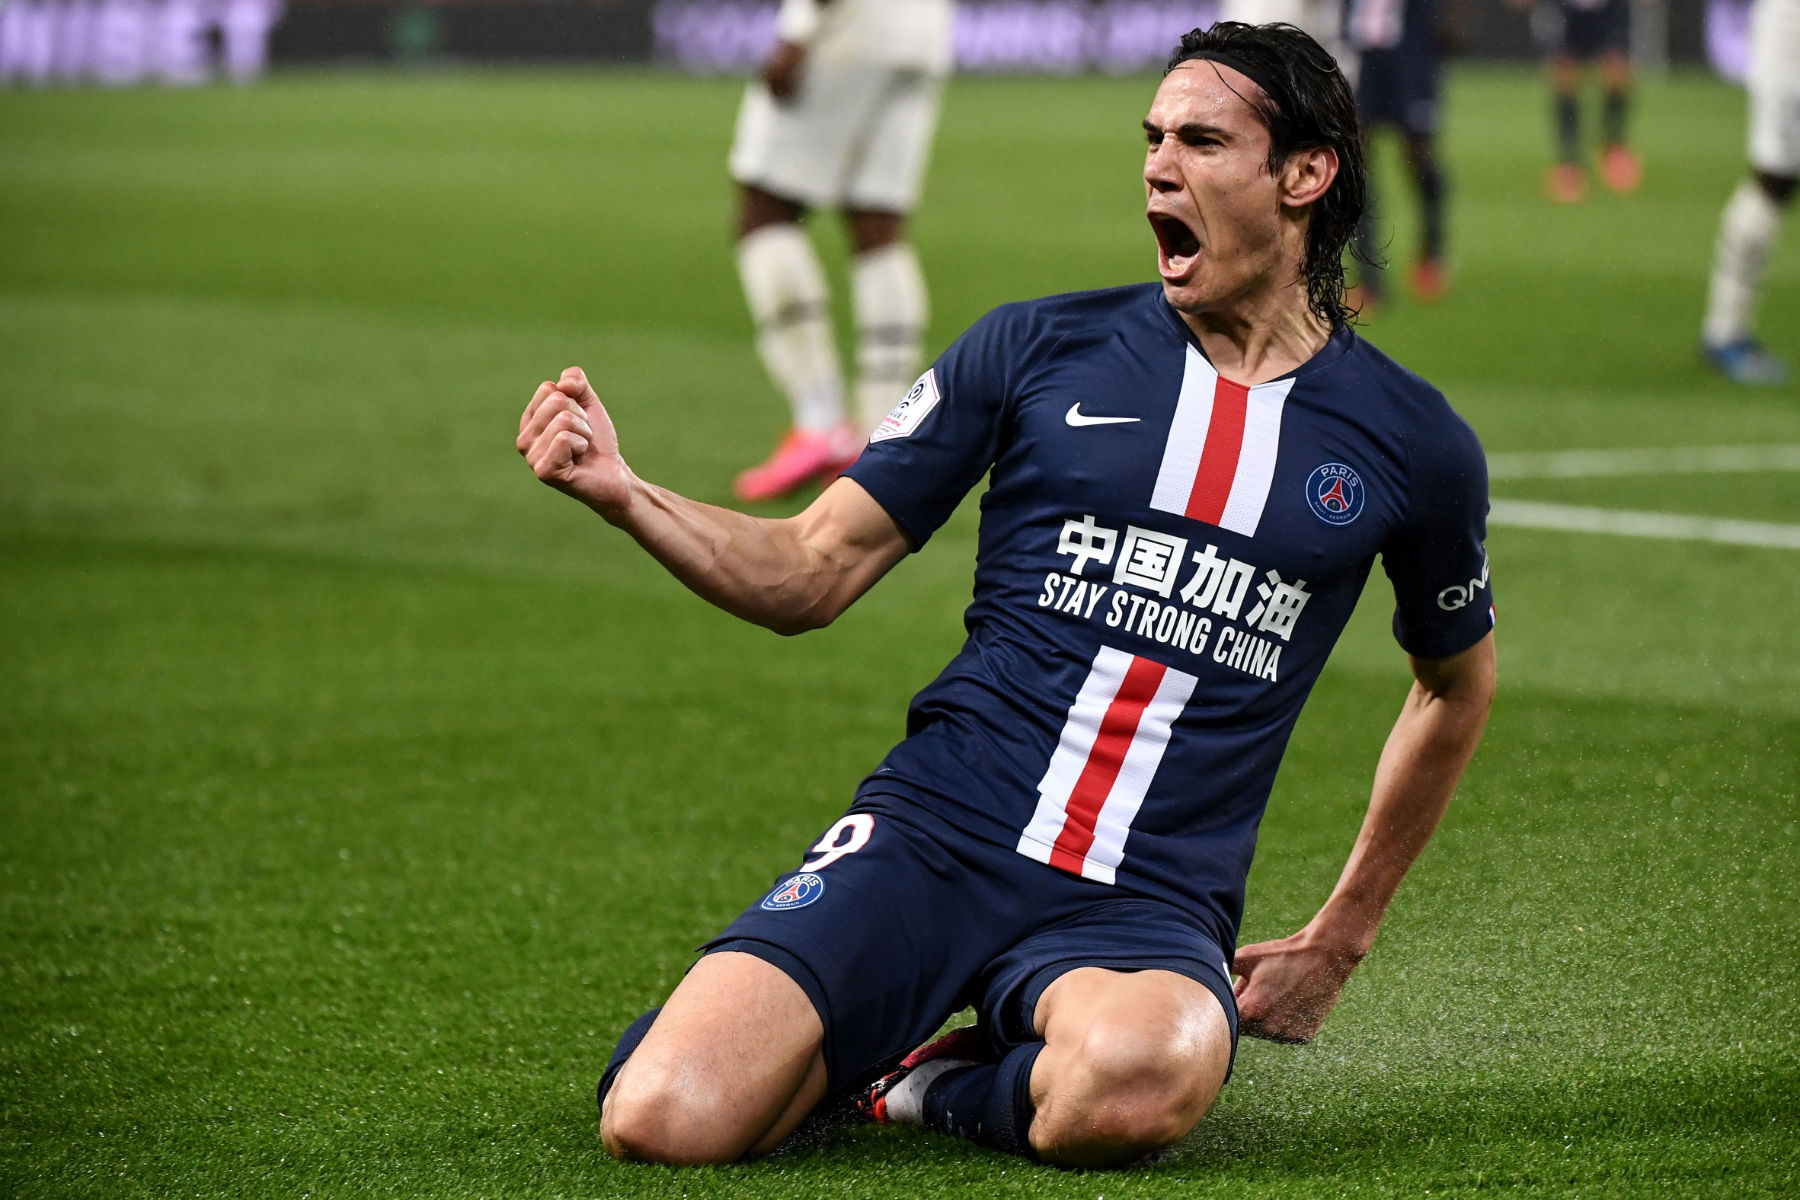 Vergissing Herrie bekennen Opinion: Cavani's Decision to Leave PSG Hurts His Legacy - PSG Talk